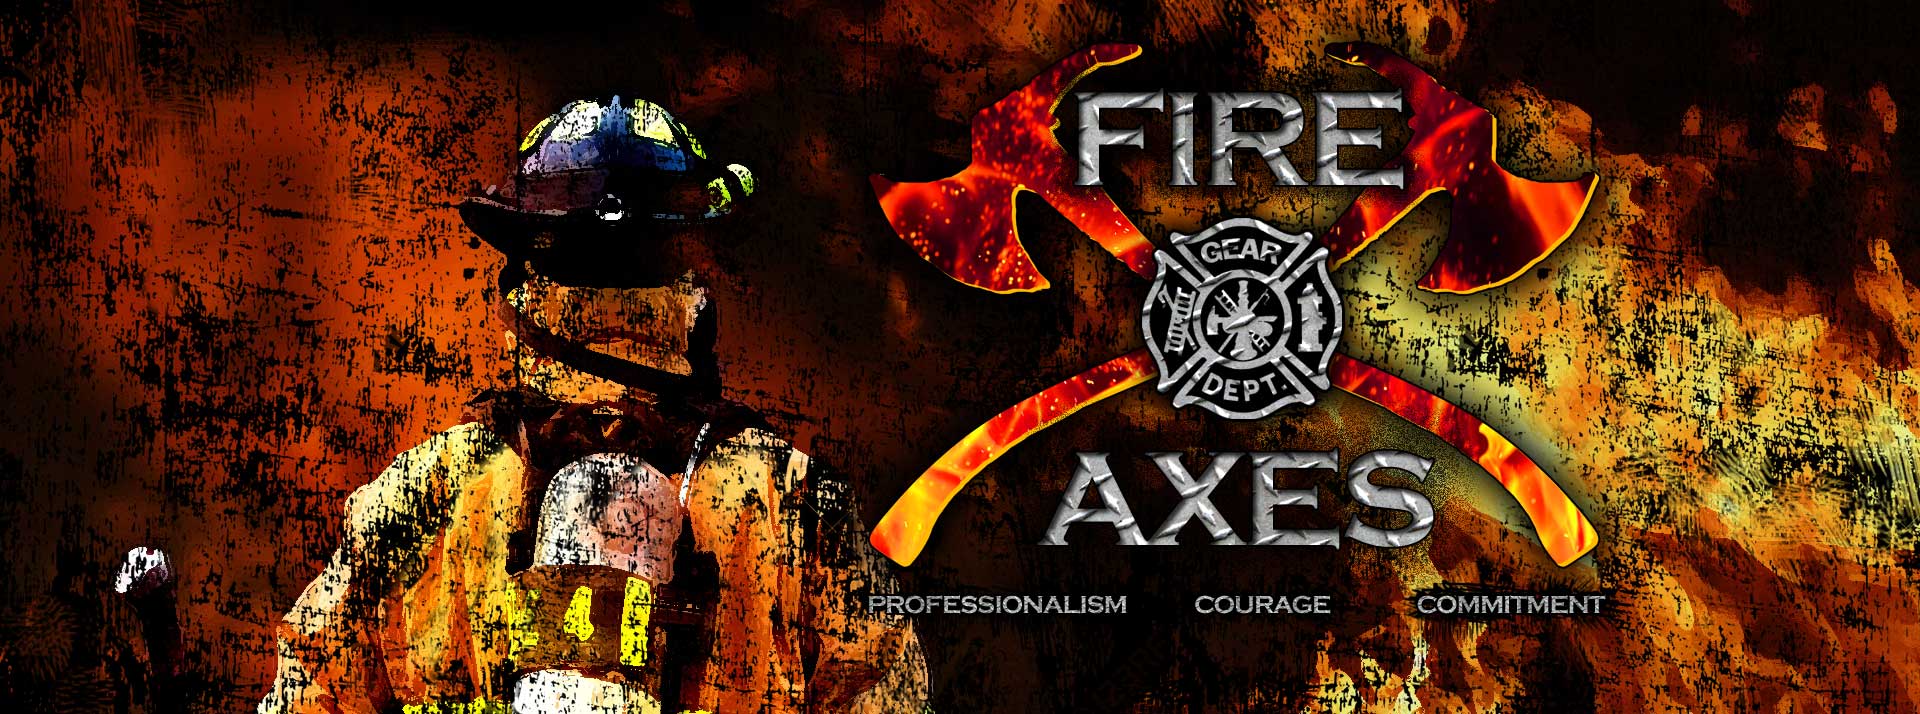 Fire and Axes sets Fire to the Firefighter Market!